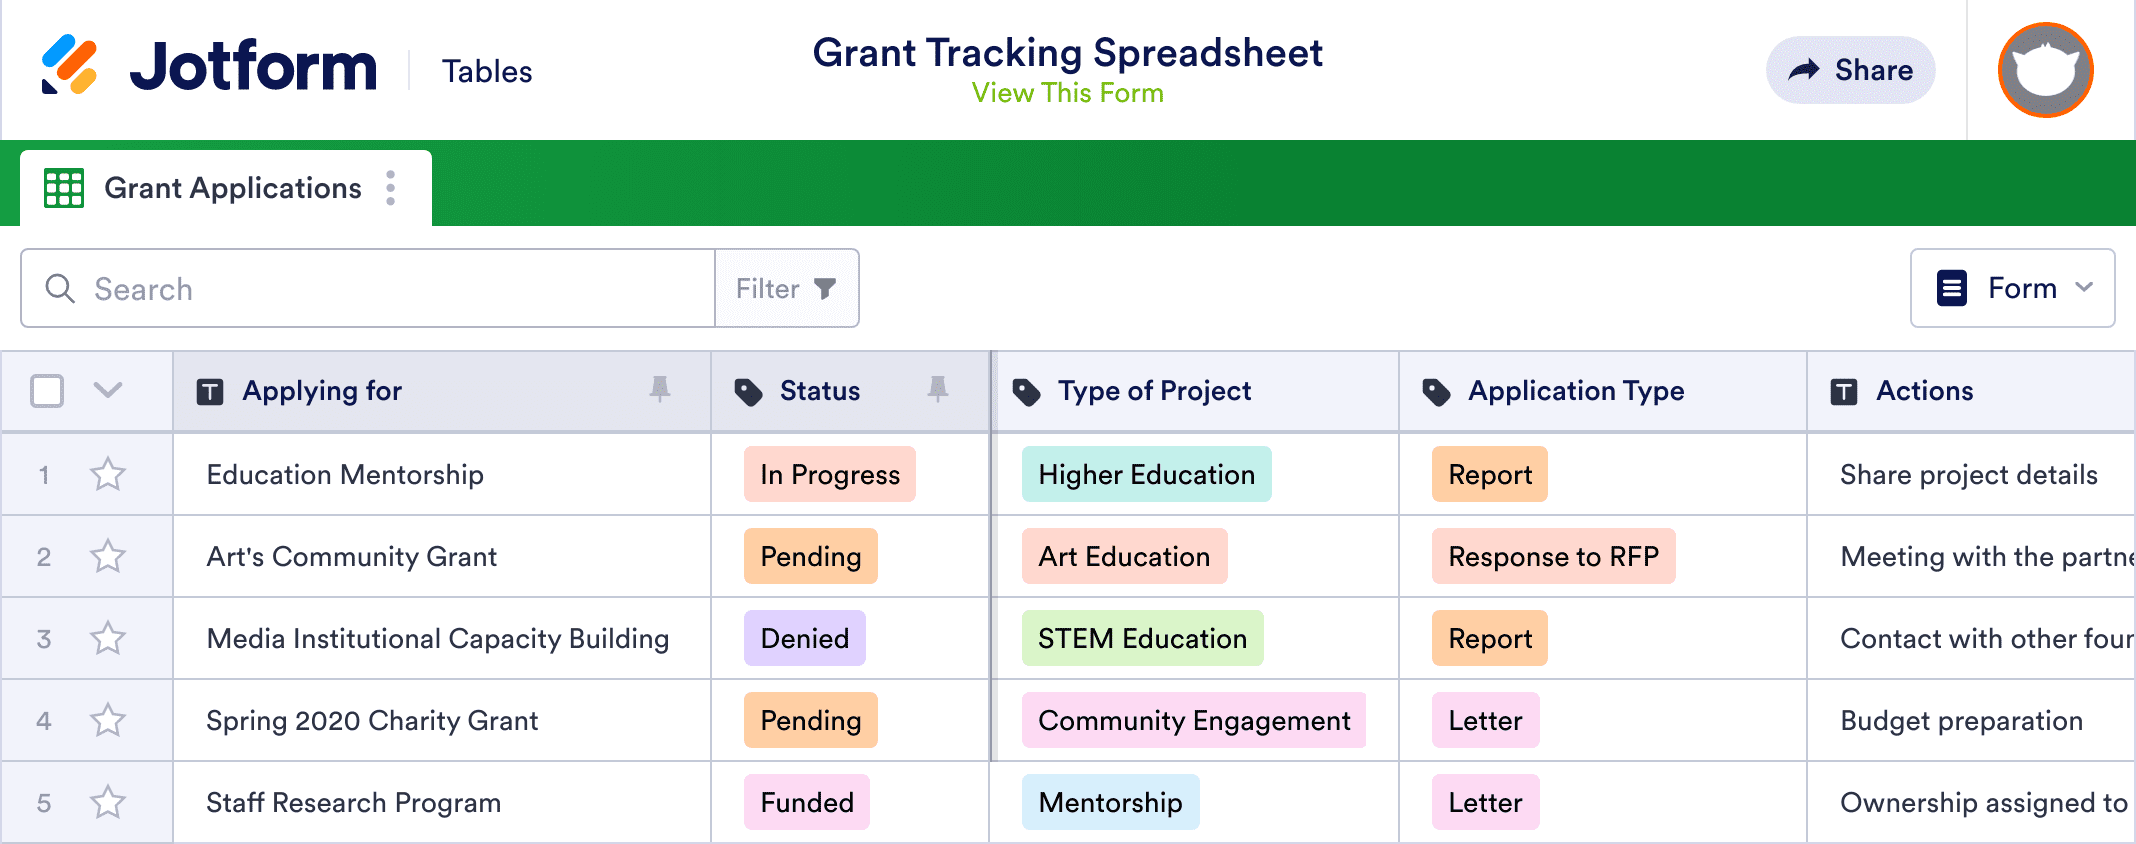 Grant Tracking Sheet Template | Jotform Tables